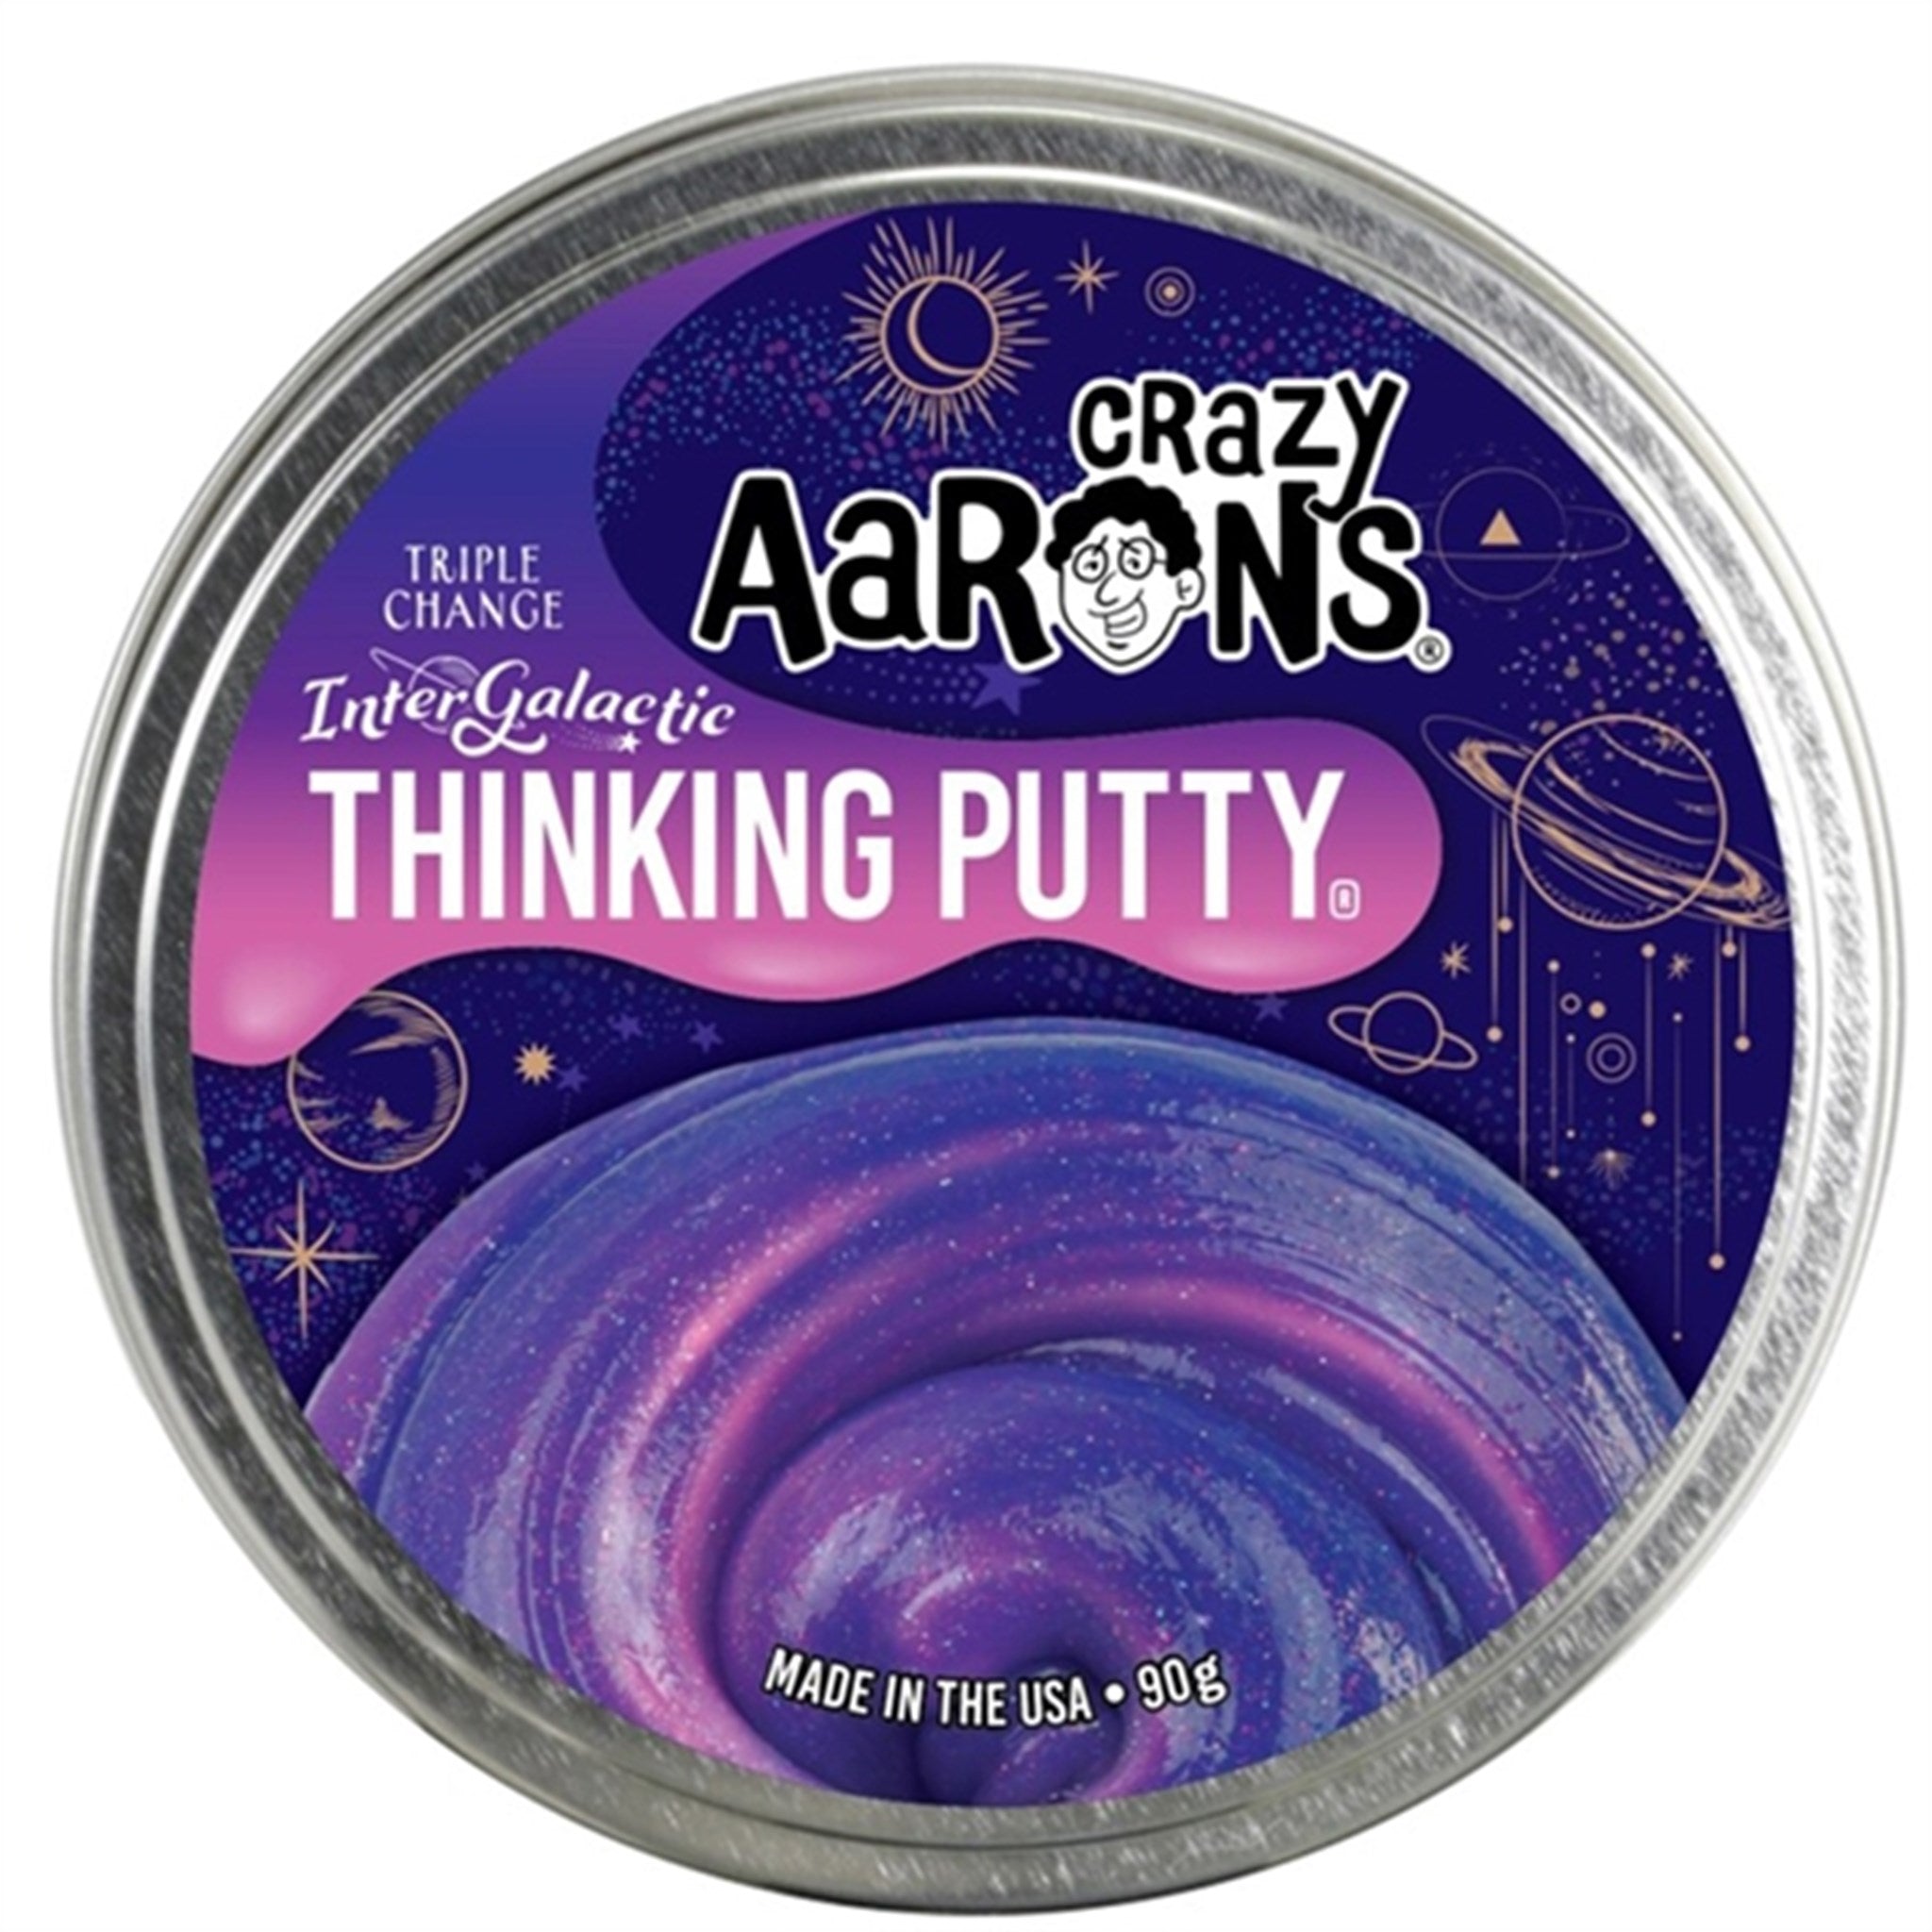 Crazy Aaron's® Thinking Putty Trendsetters - Intergalactic